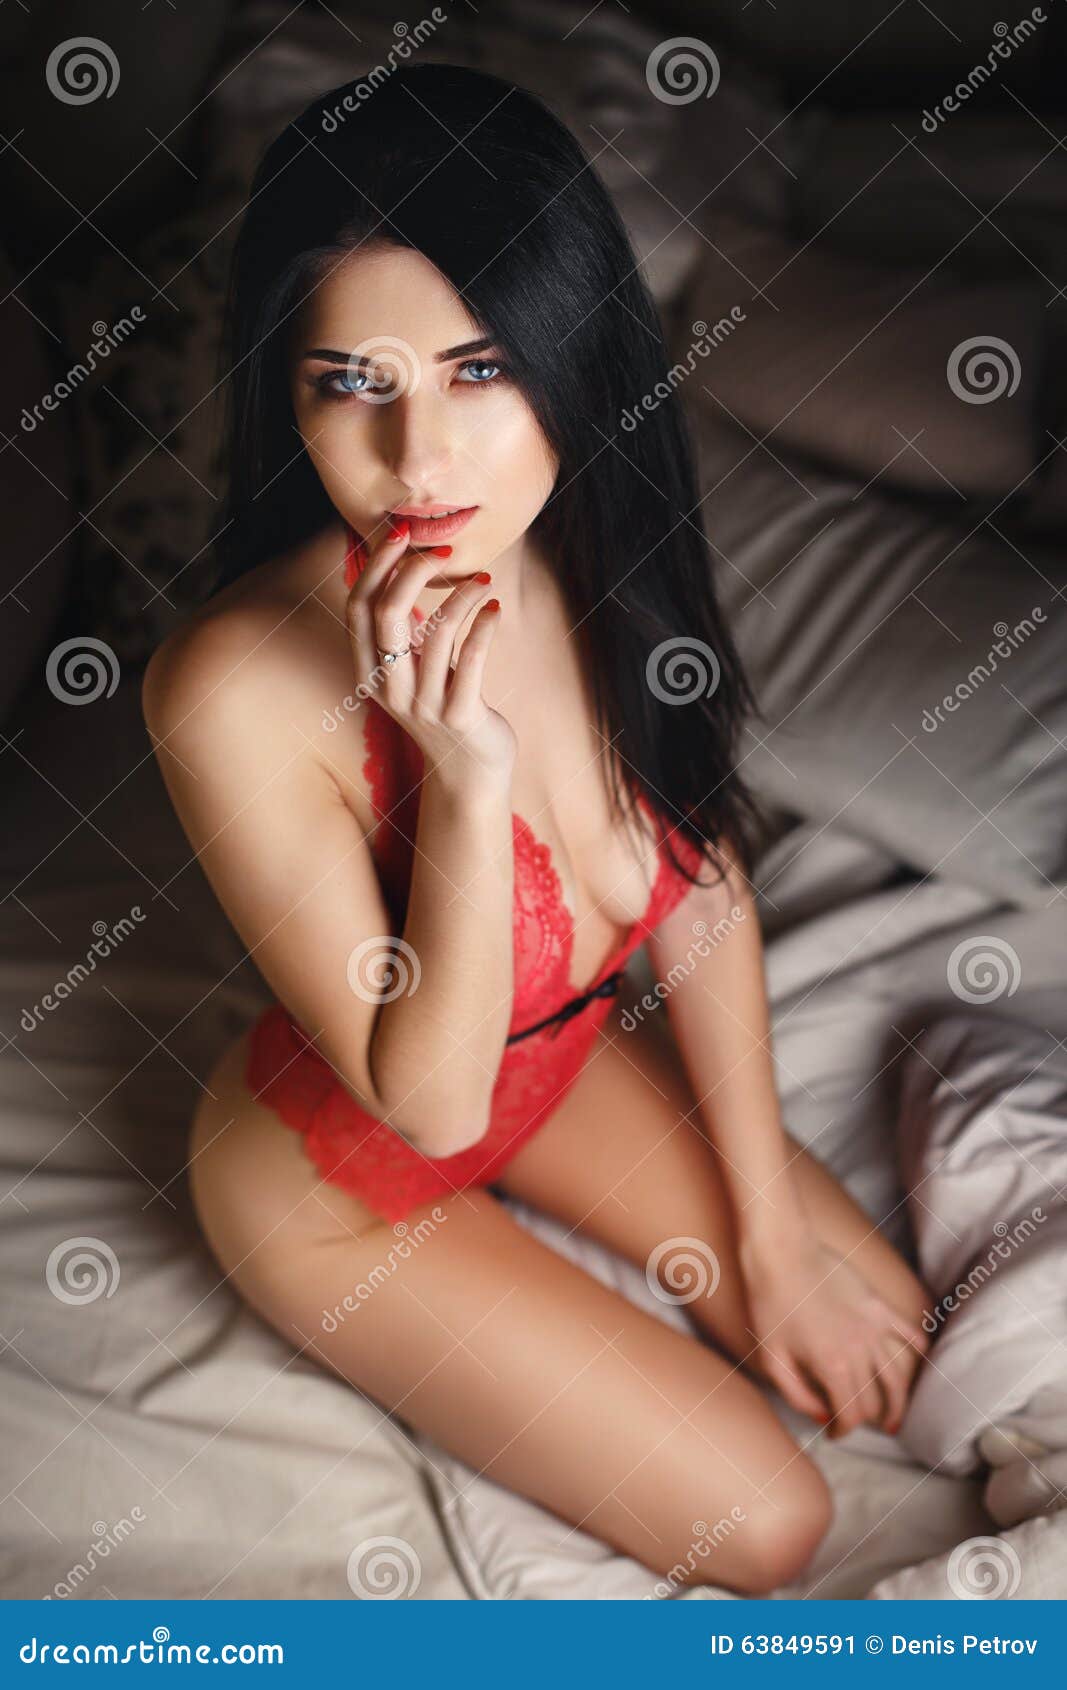 Beautiful Young Girl in a Red Lingerie Stock Image hq nude image